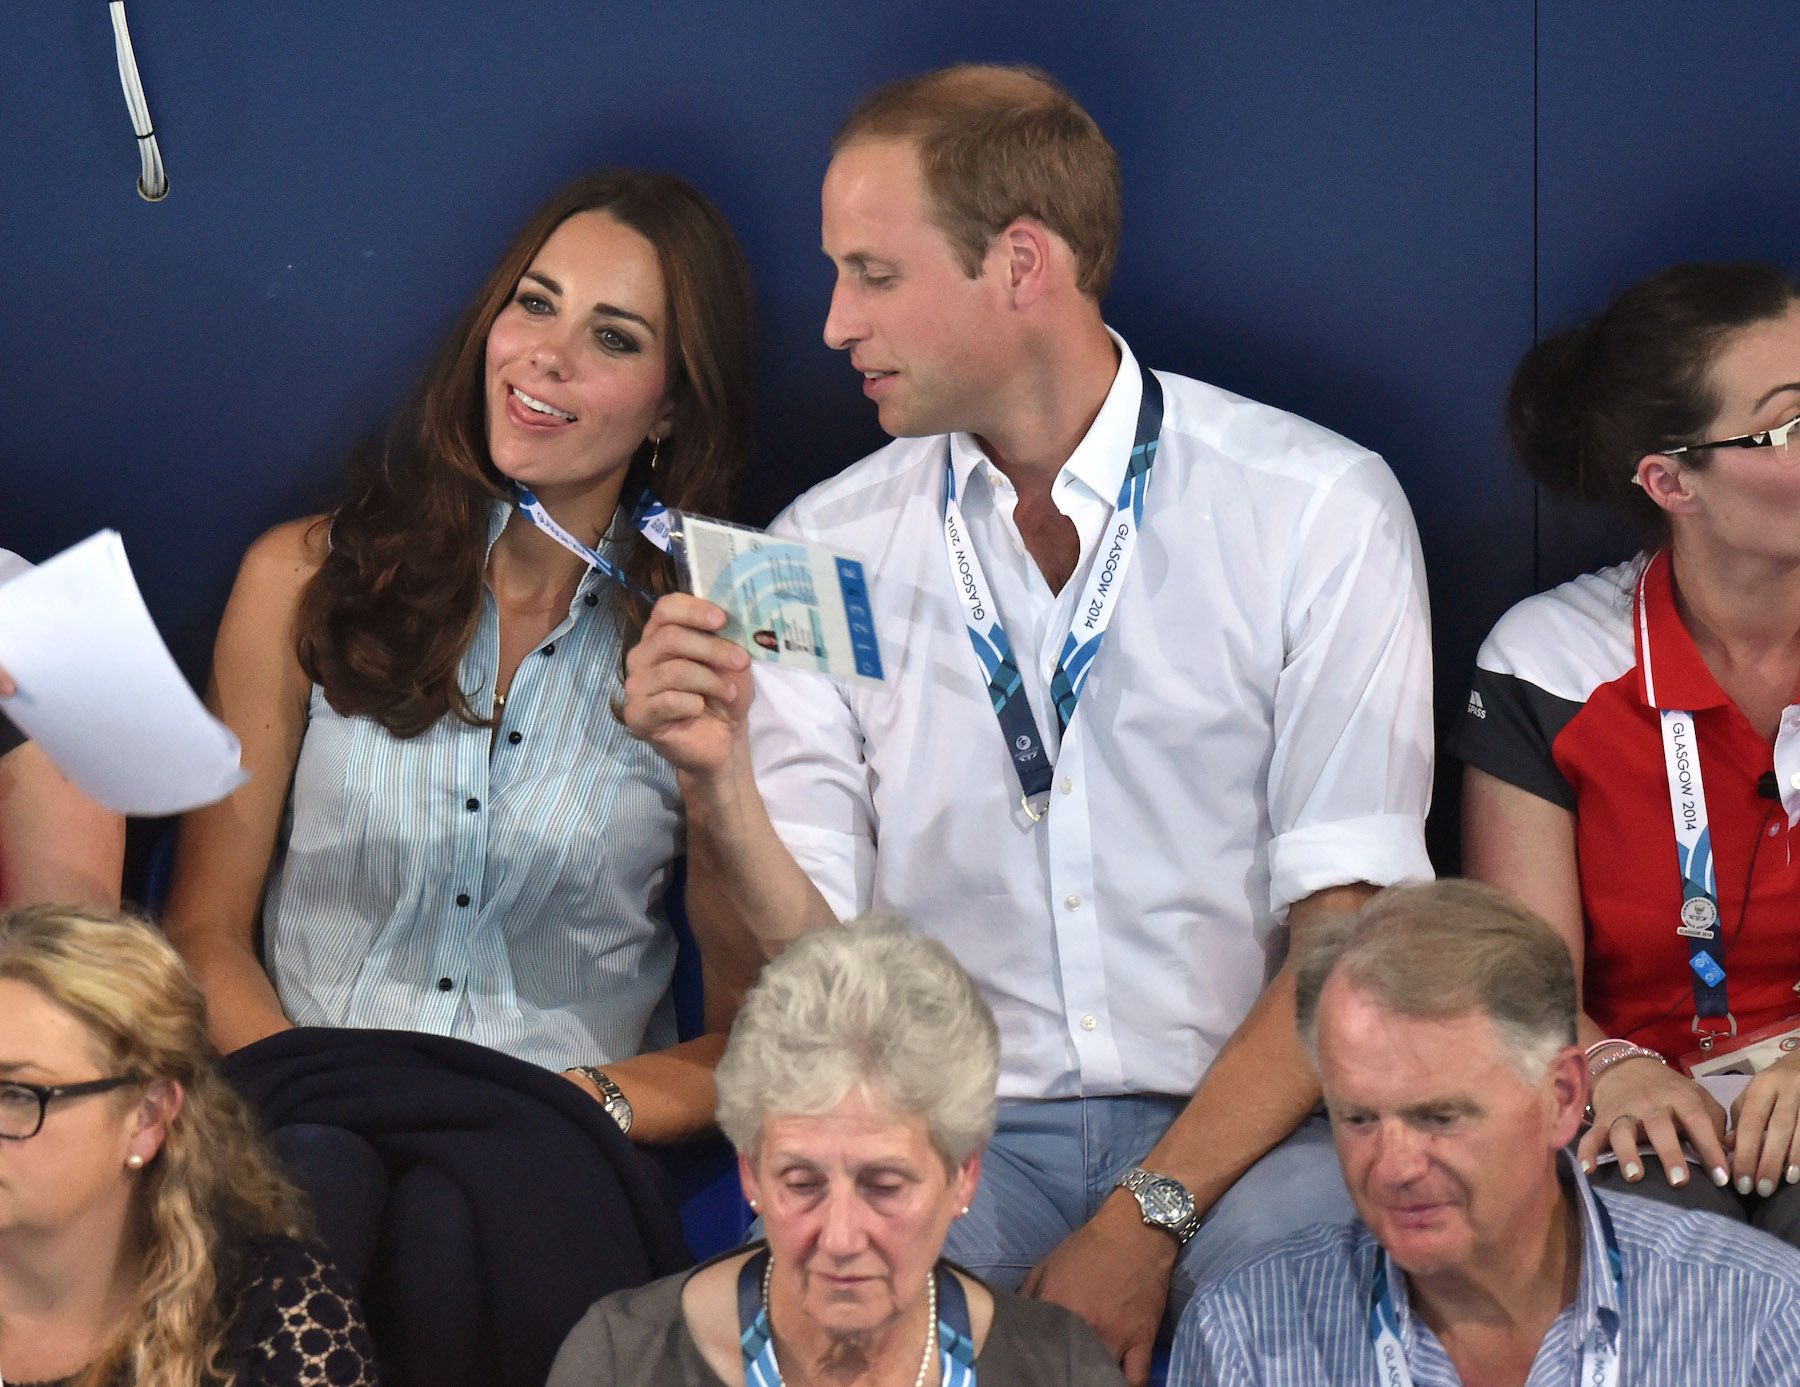 24 Times Kate Middleton Proved She's Just Like Us